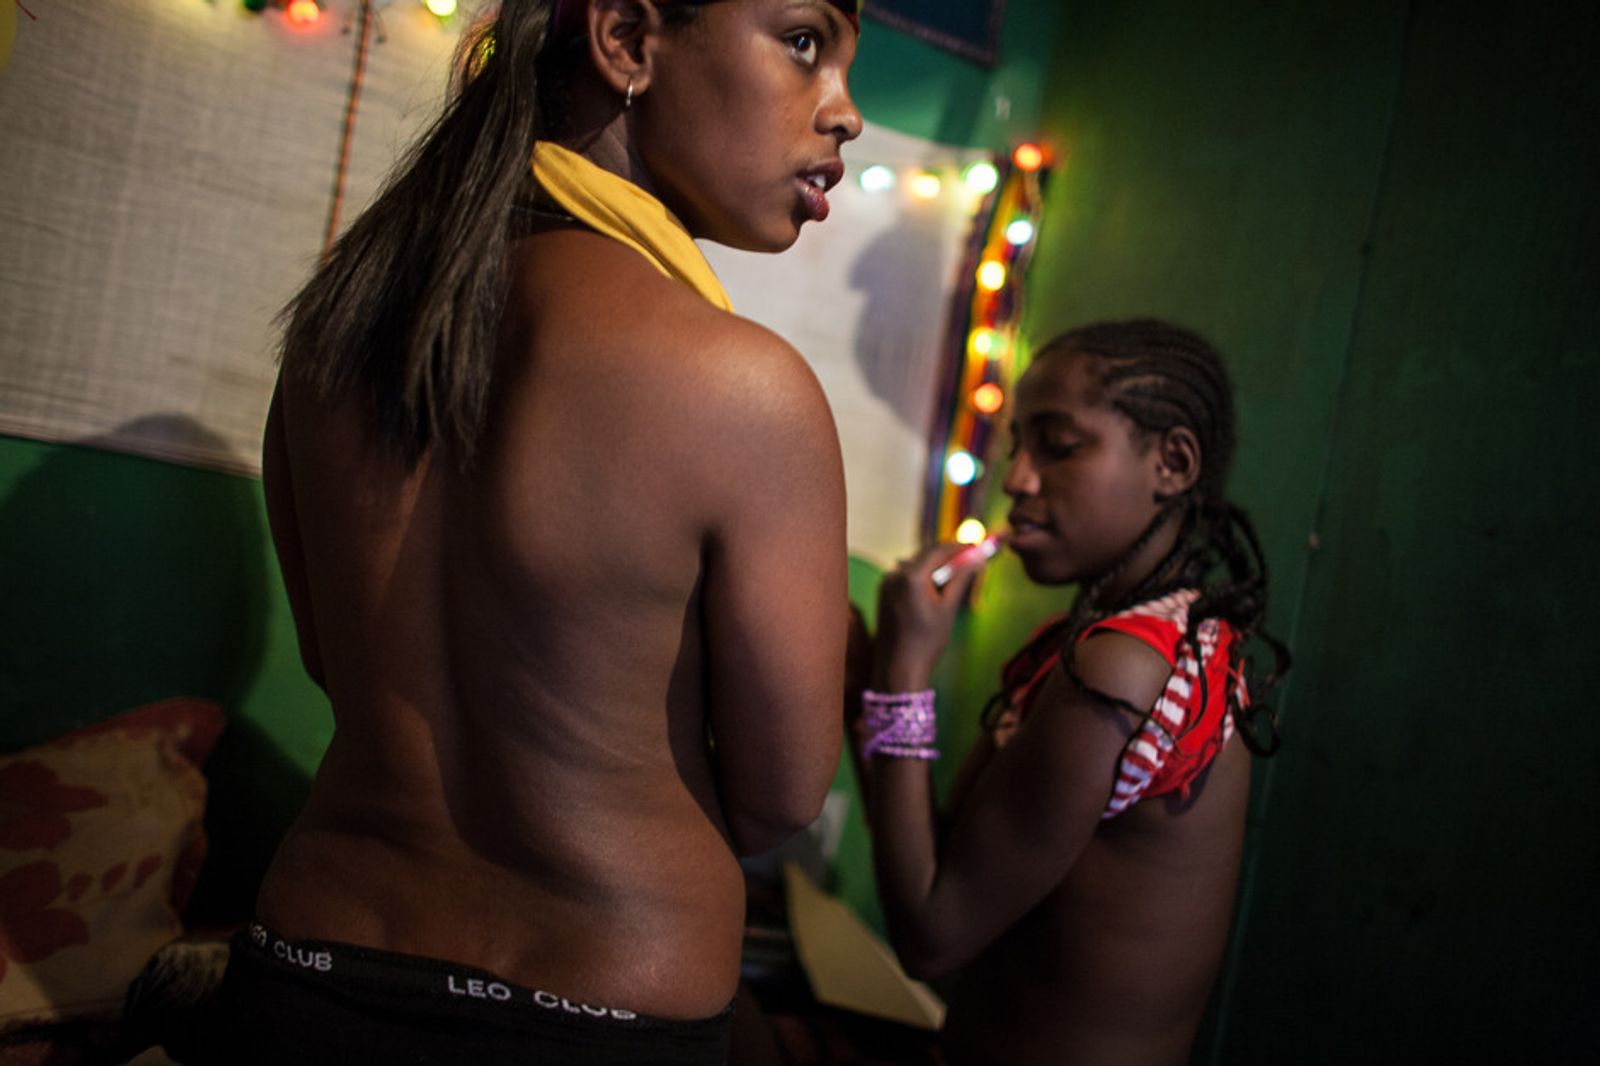 © Achille Piotrowicz - Image from the looking for cheap sex. Child prostitution in Ethiopia photography project